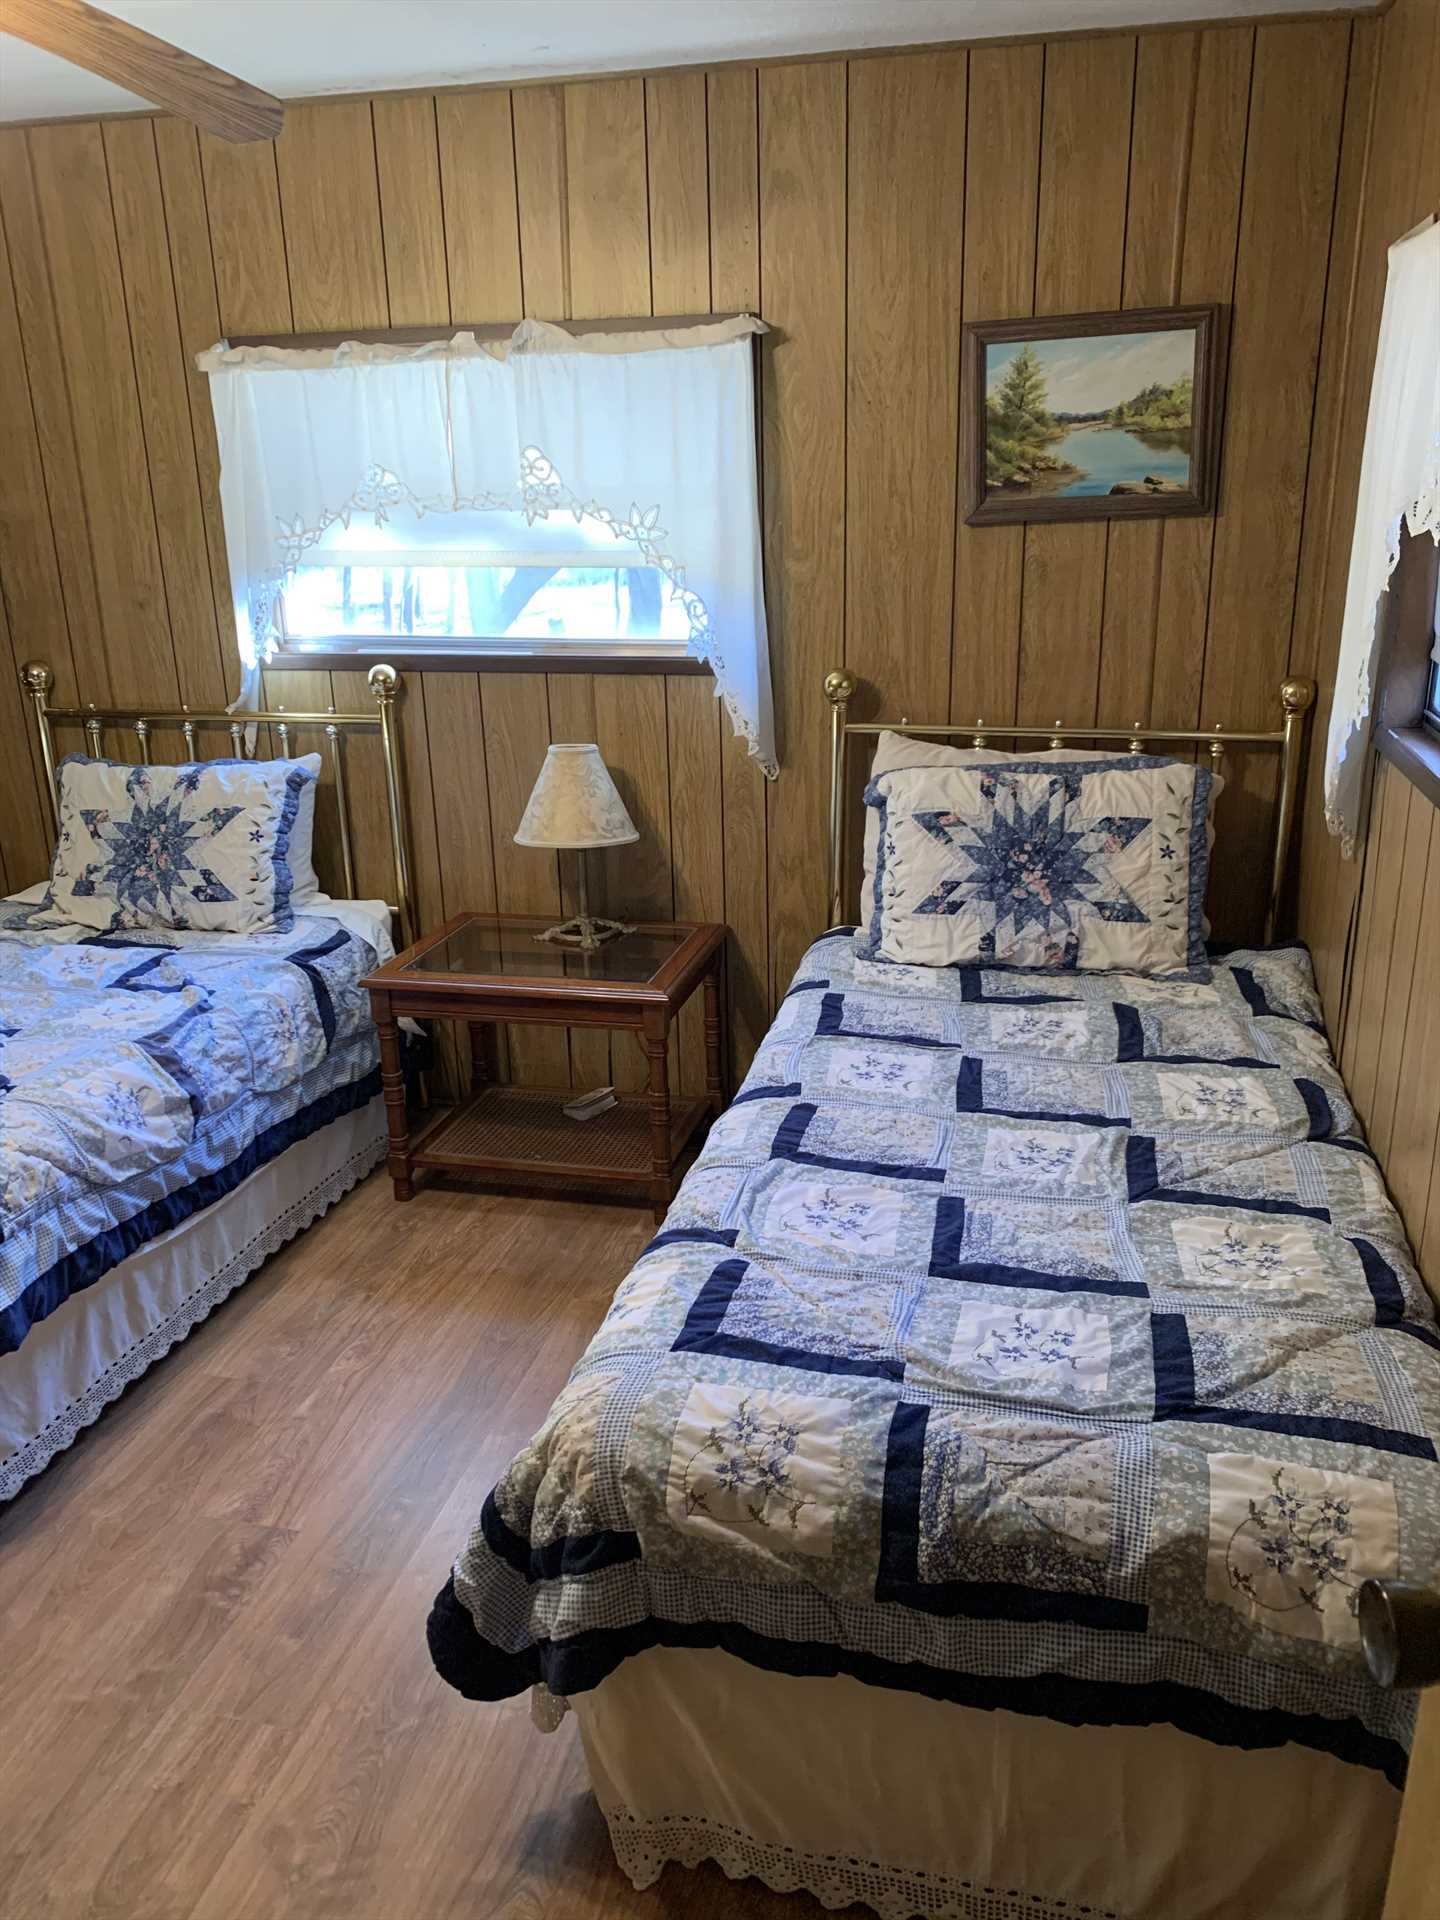                                                 Two more guests can sleep in soft comfort in the second bedroom, equipped with matching twin beds.